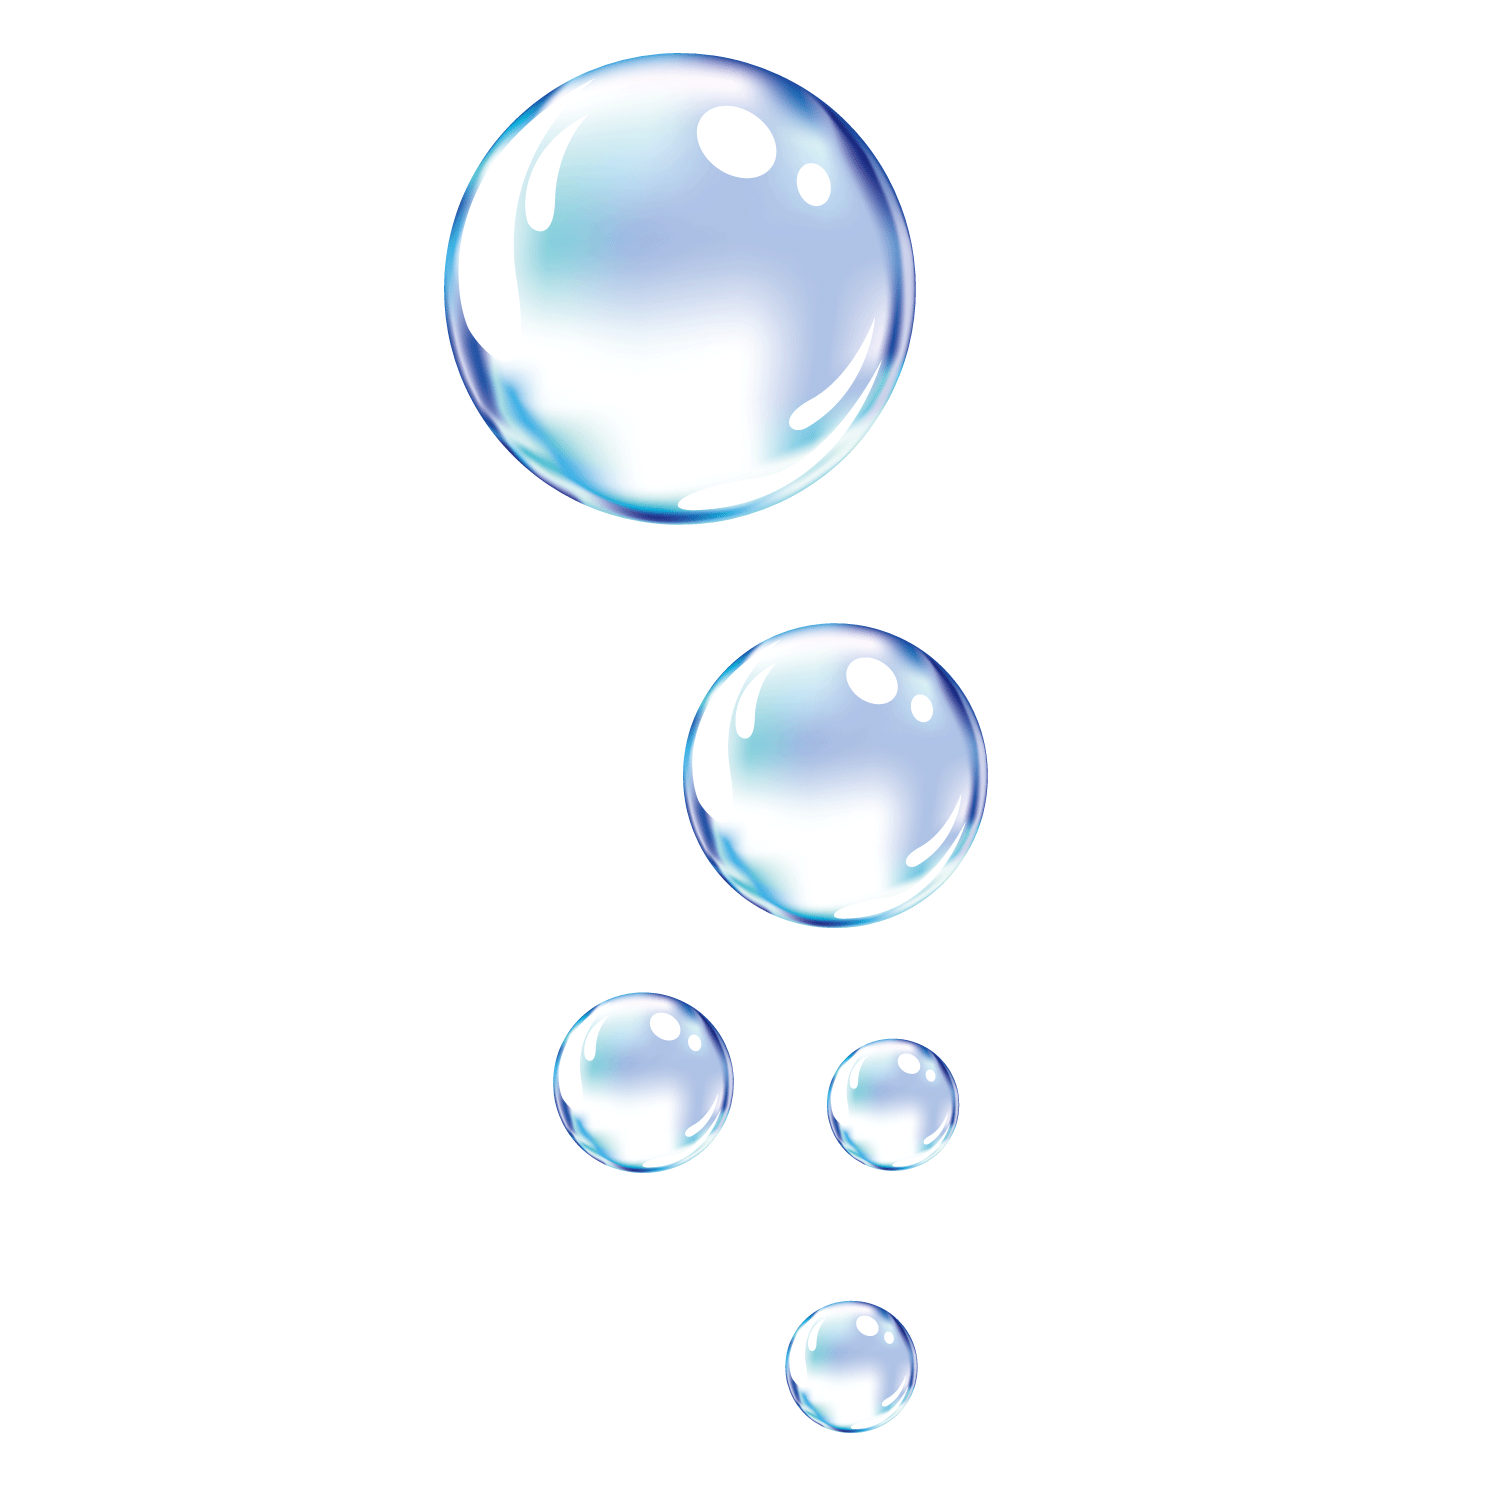 0 Result Images of Cartoon Water Bubble Png - PNG Image Collection